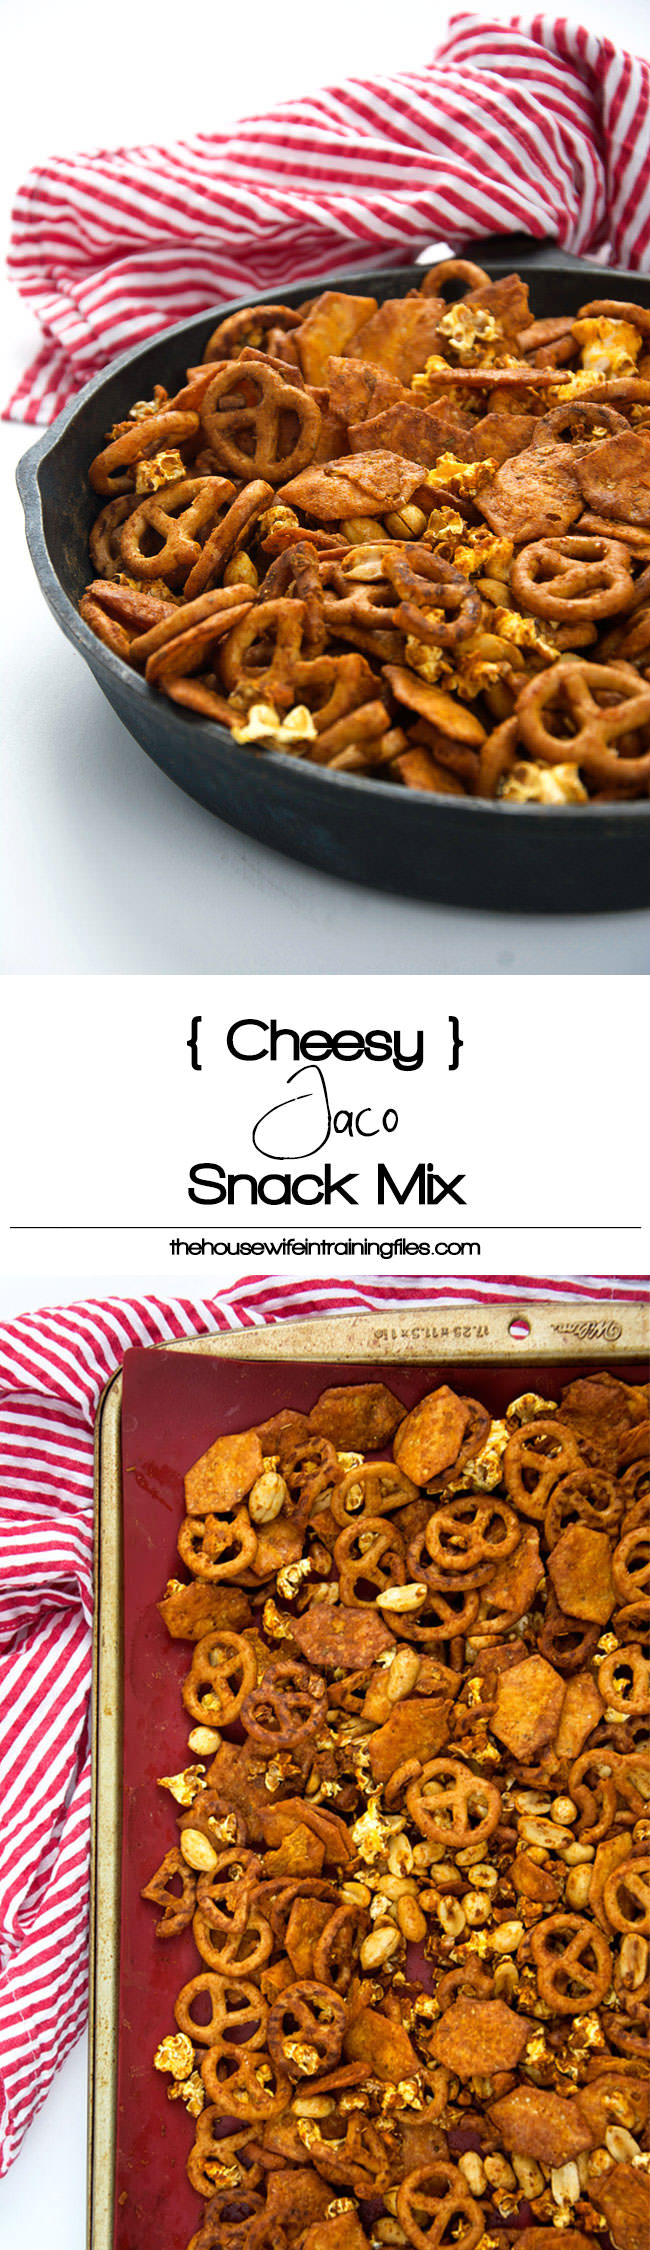 A cheesy and spicy taco snack mix with crunchy popcorn, salty pretzels, buttery peanuts and cheesy crackers! Perfect for watching an afternoon football or baseball game! #snackmix #glutenfree #taco #gameday